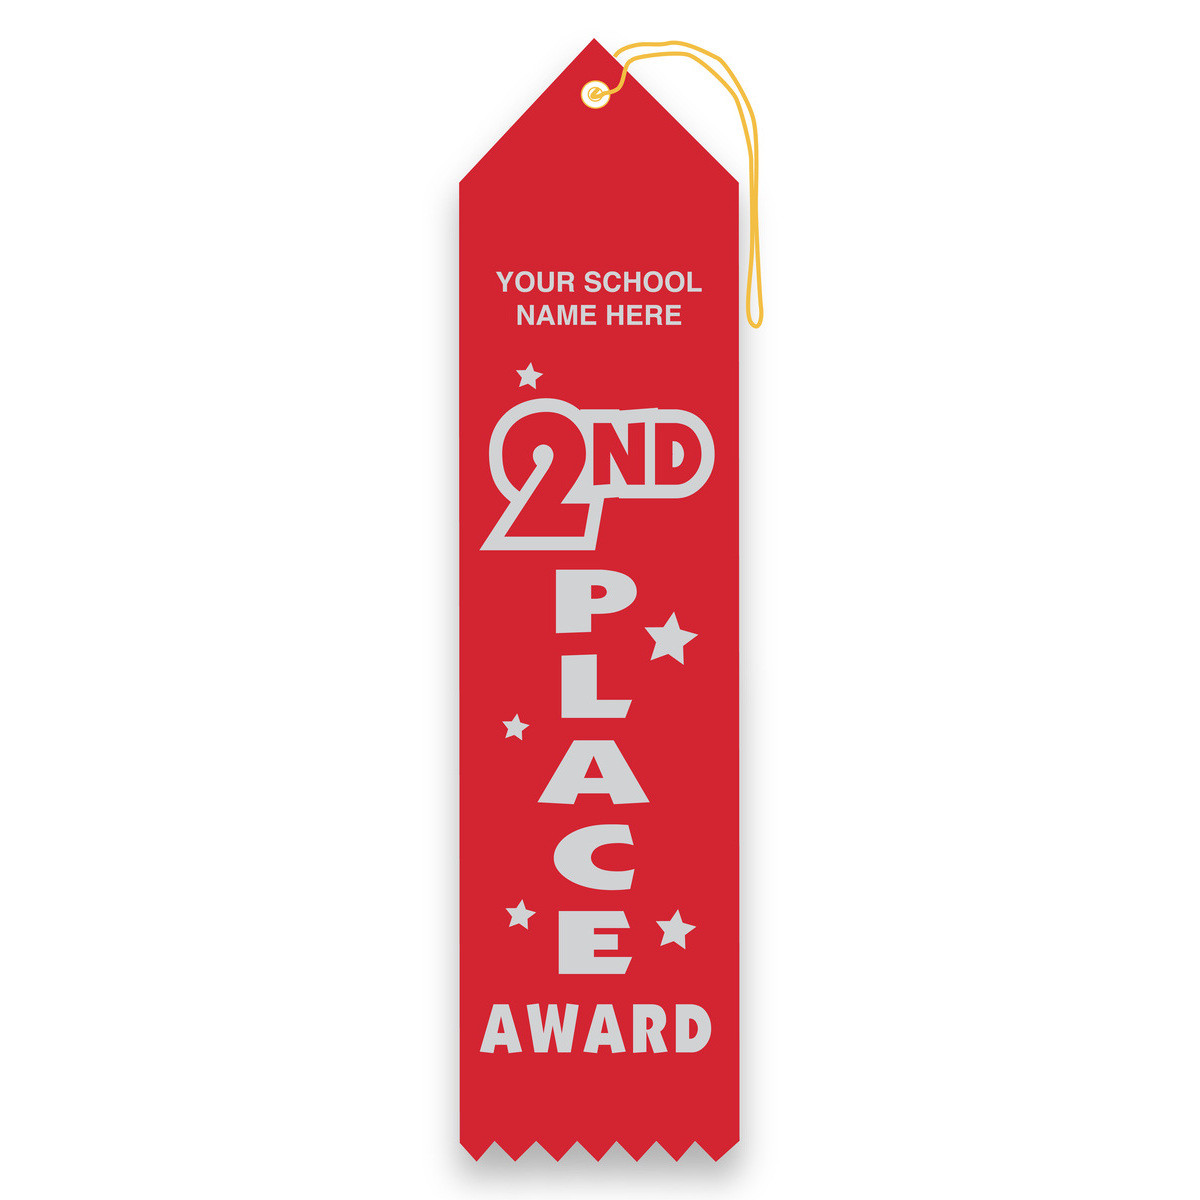 Imprinted Carded Ribbon - 2nd Place Award